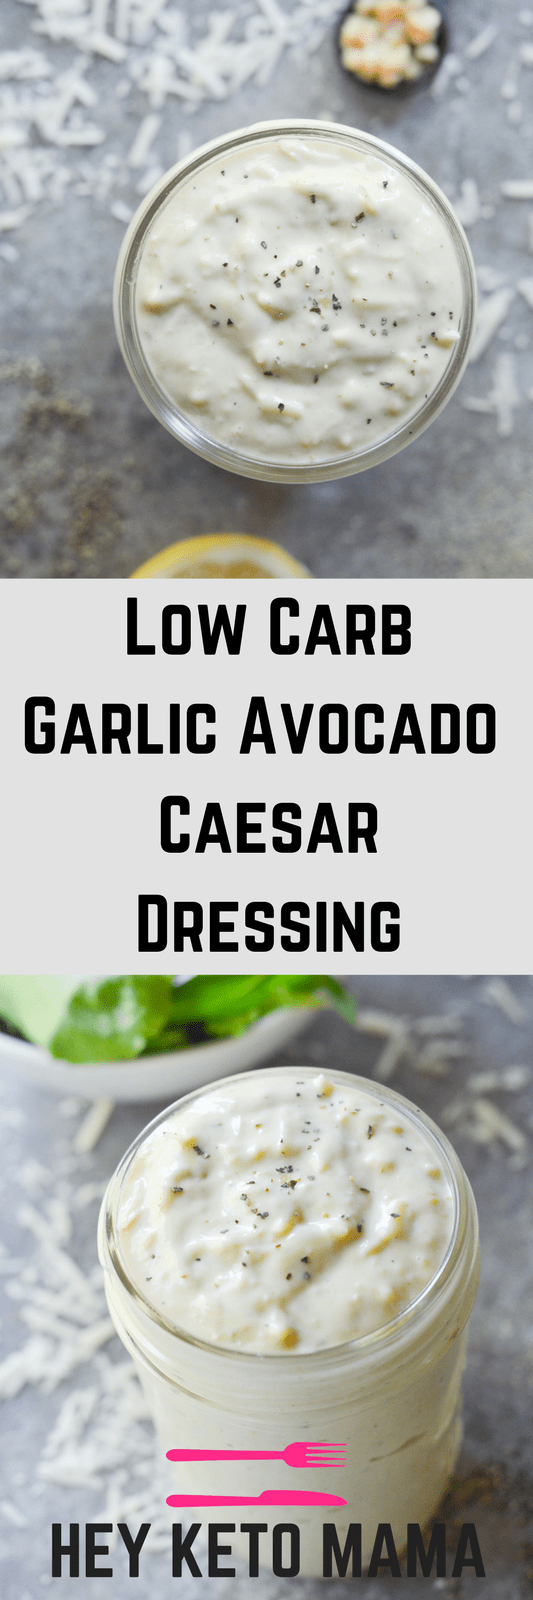 This Low Carb Garlic Avocado Caesar Dressing is a beautiful, quick, and easy way to dress any of your low carb salads! | heyketomama.com